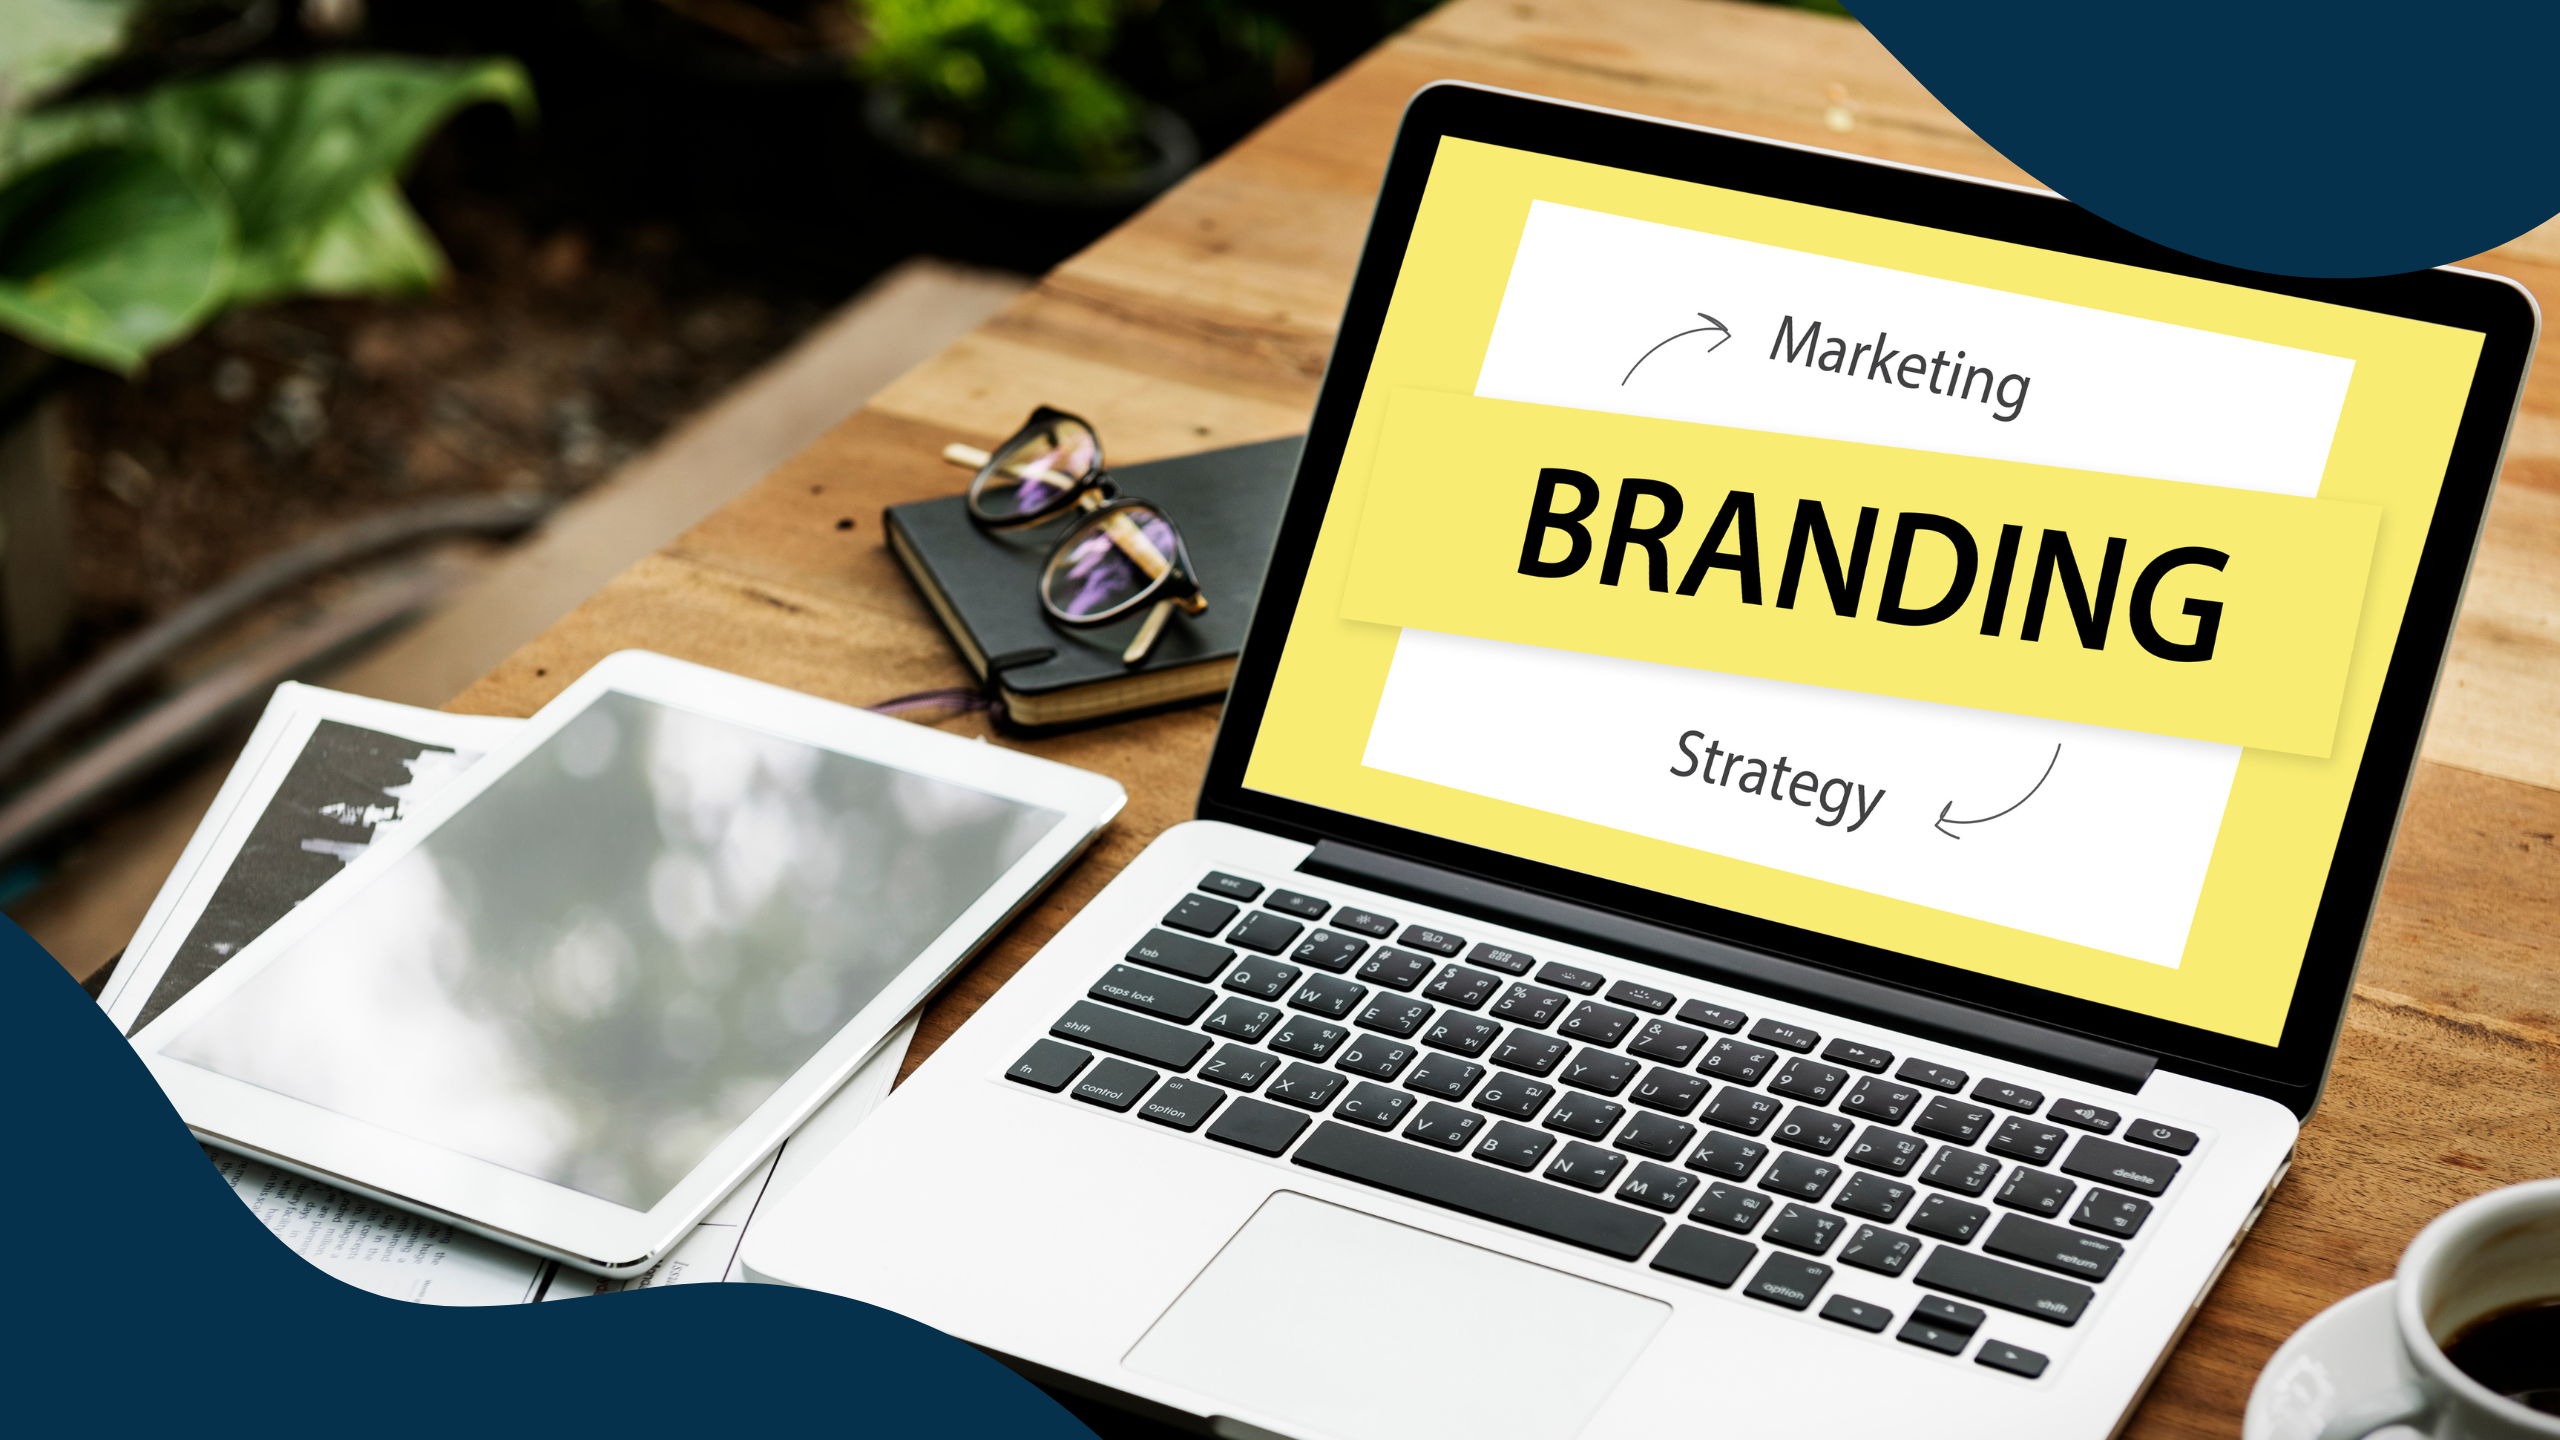 7 Steps to Branding Your Business